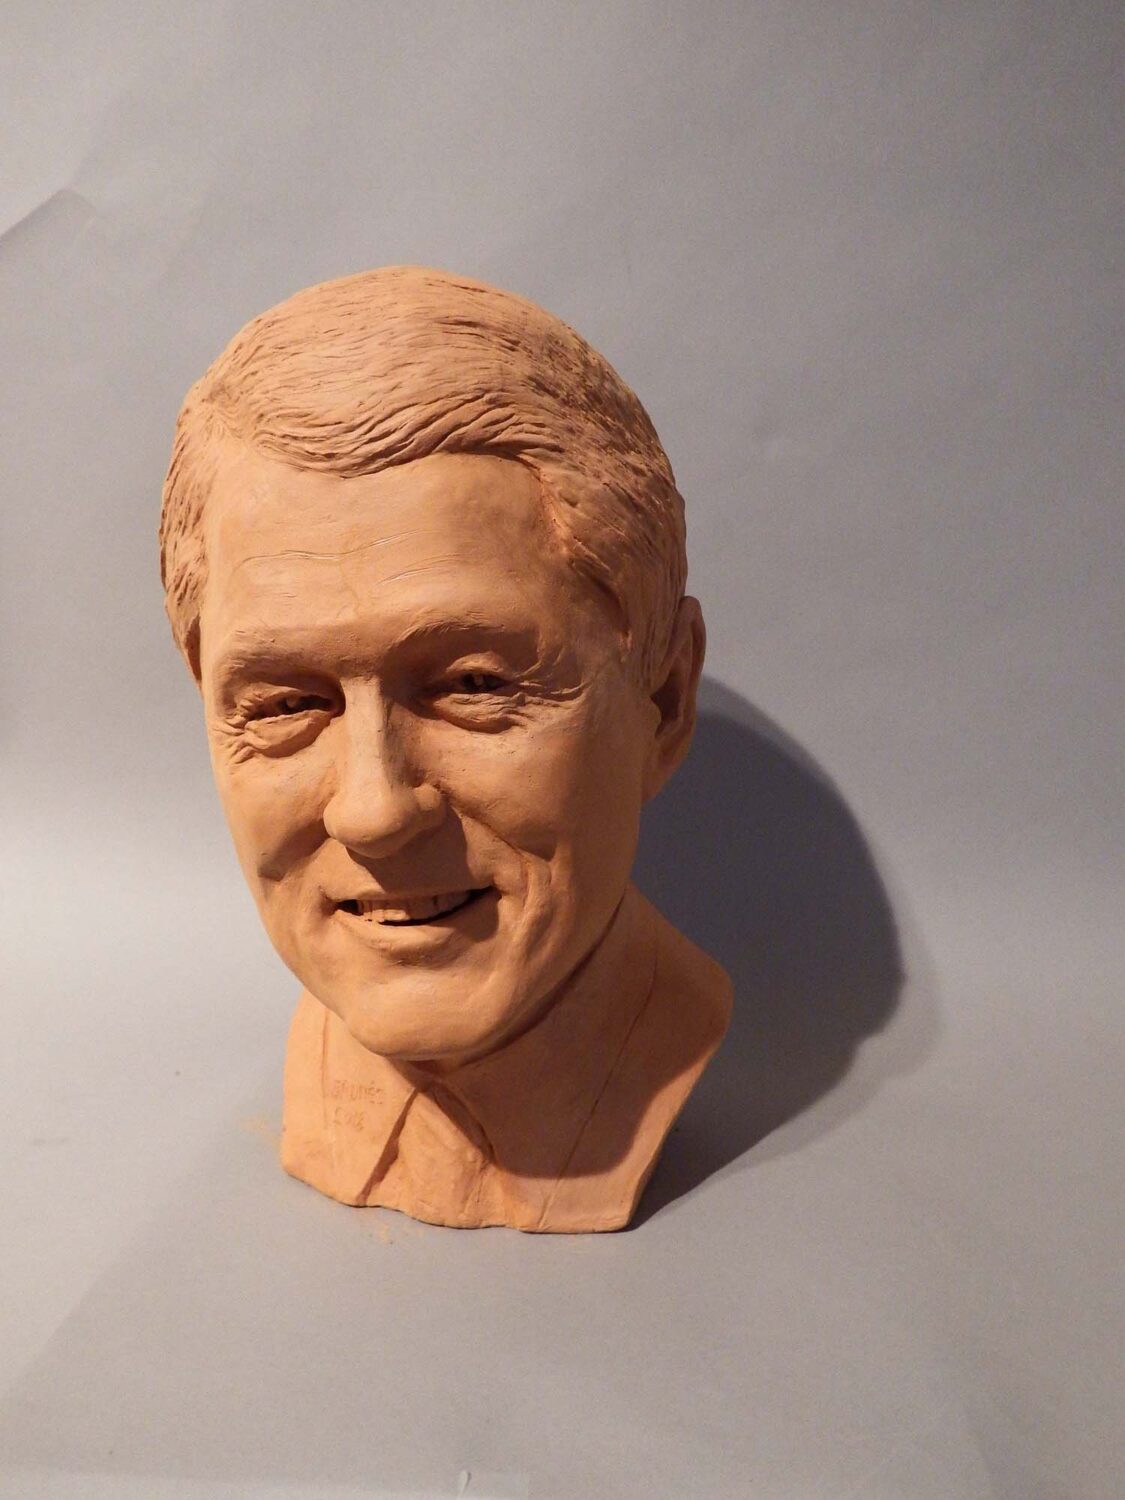 thumbnail of Sculpture of Bill Clinton made out of Terra cotta